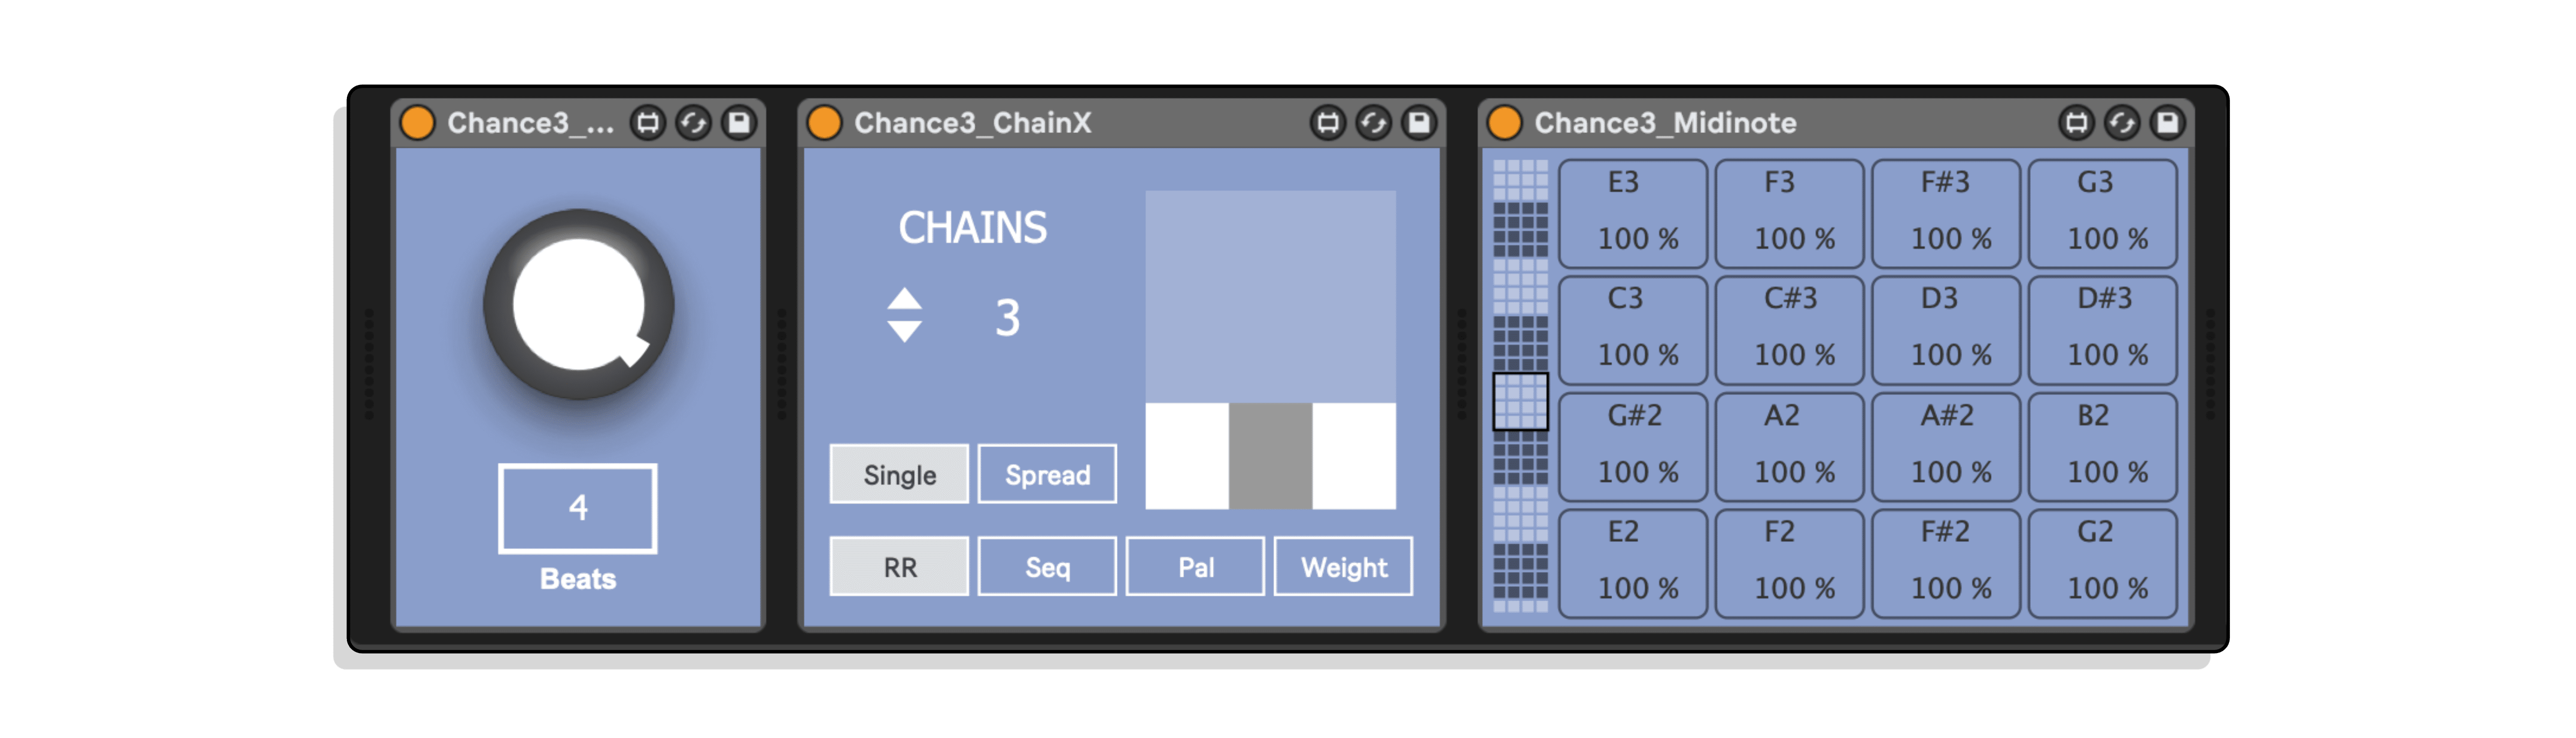 Chance THREE MaxforLive MIDI Devices for Ableton Live by LDM Design